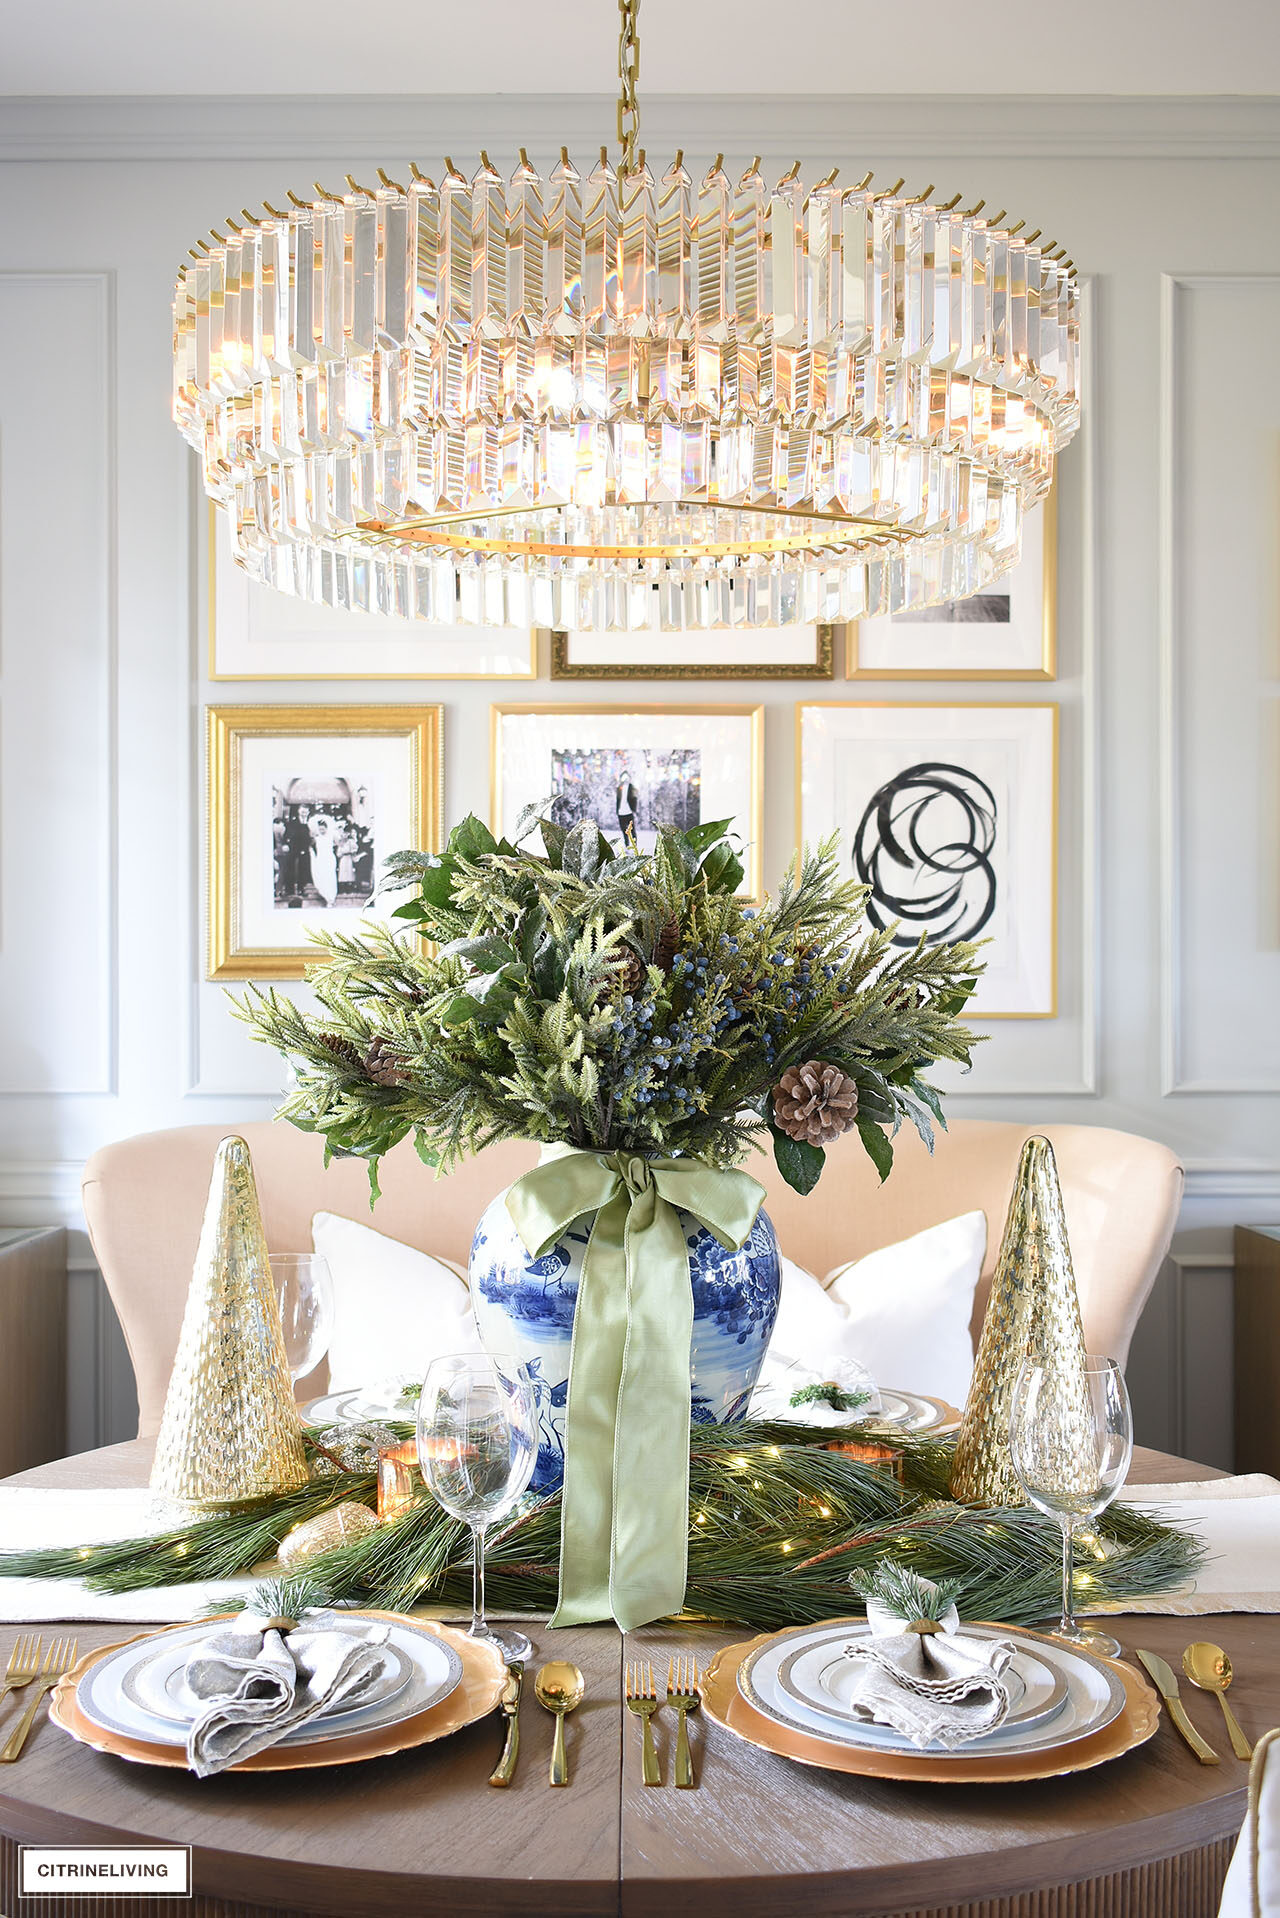 Christmas centerpiece with holiday greenery and blue and white ginger jar, silver and gold dishes